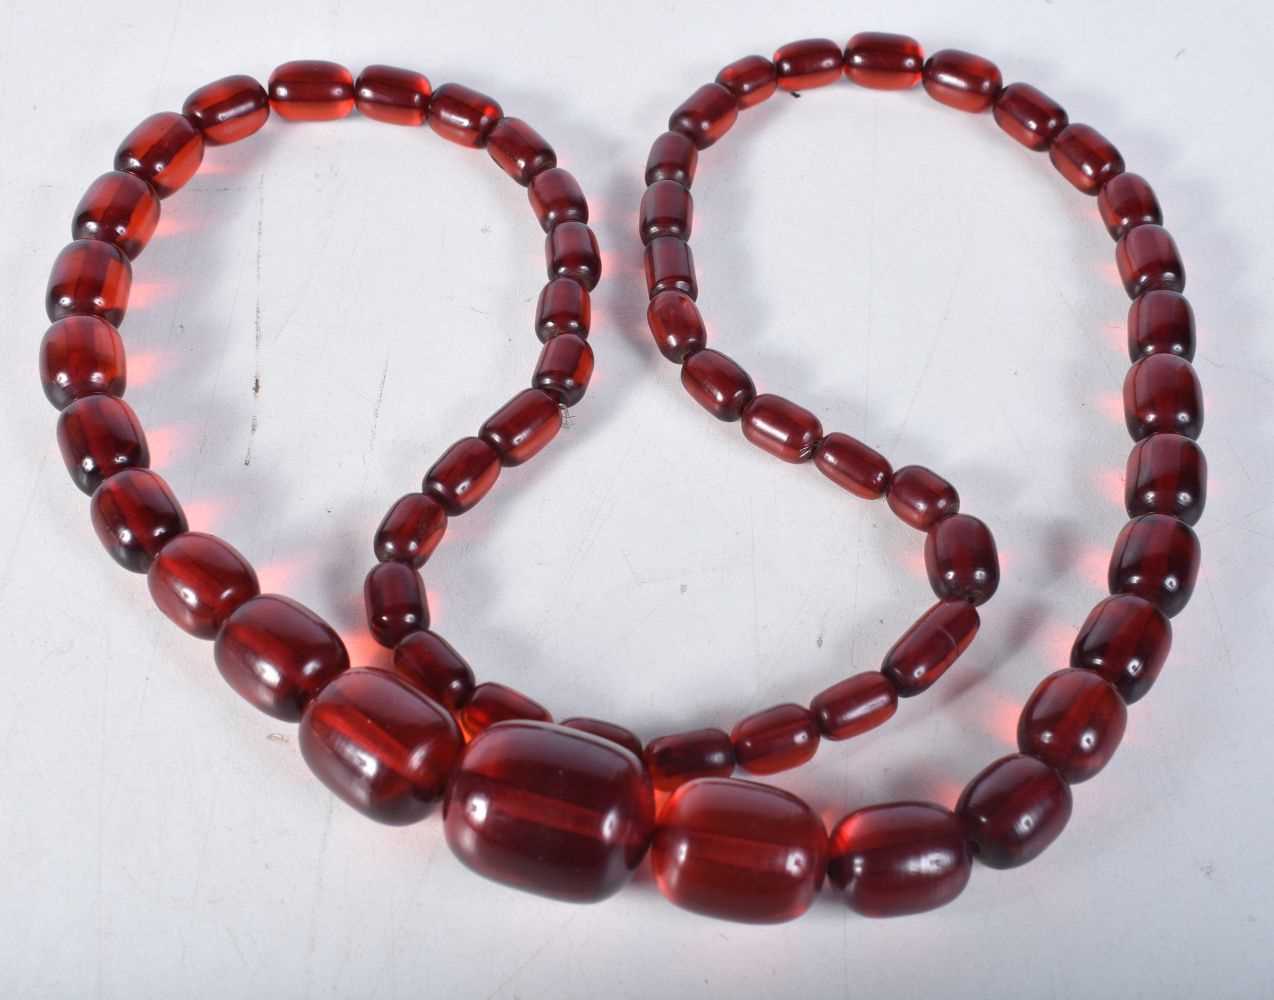 Cherry Bakelite graduated necklace. 88cm long, Largest Bead 22mm, weight 93g